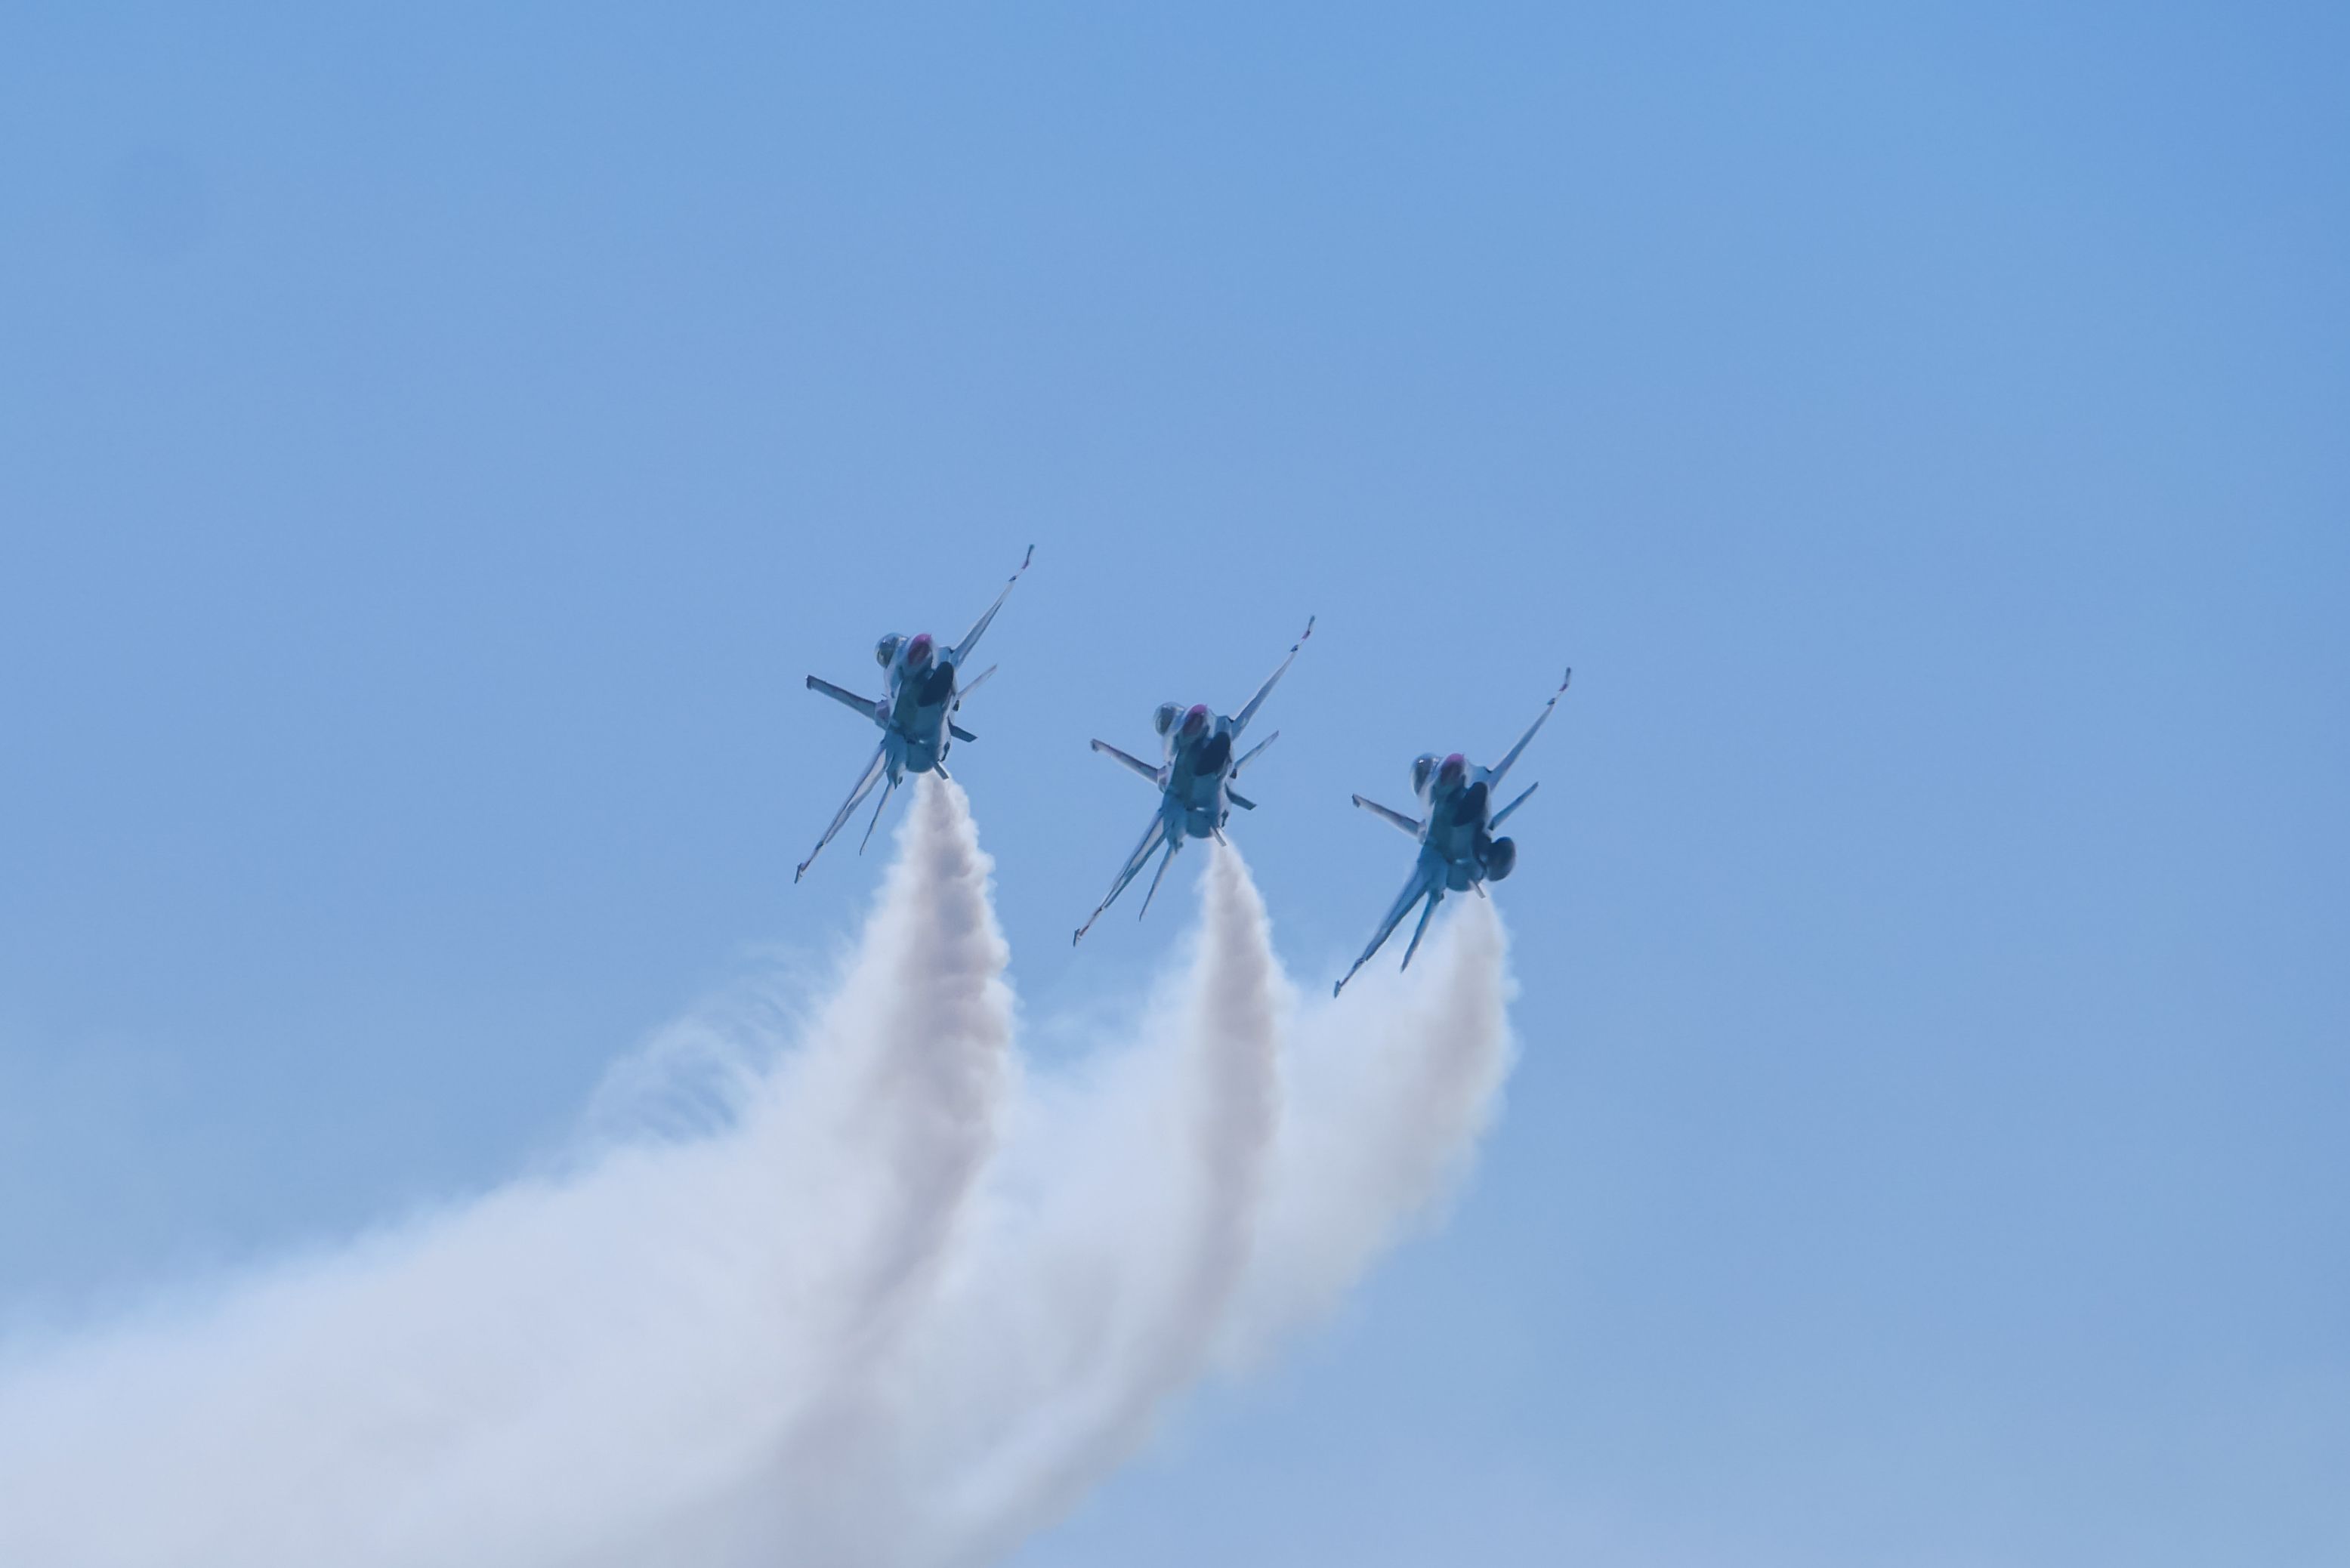 Three fighter jets fly in formation toward the camera with smoke trailing behind.